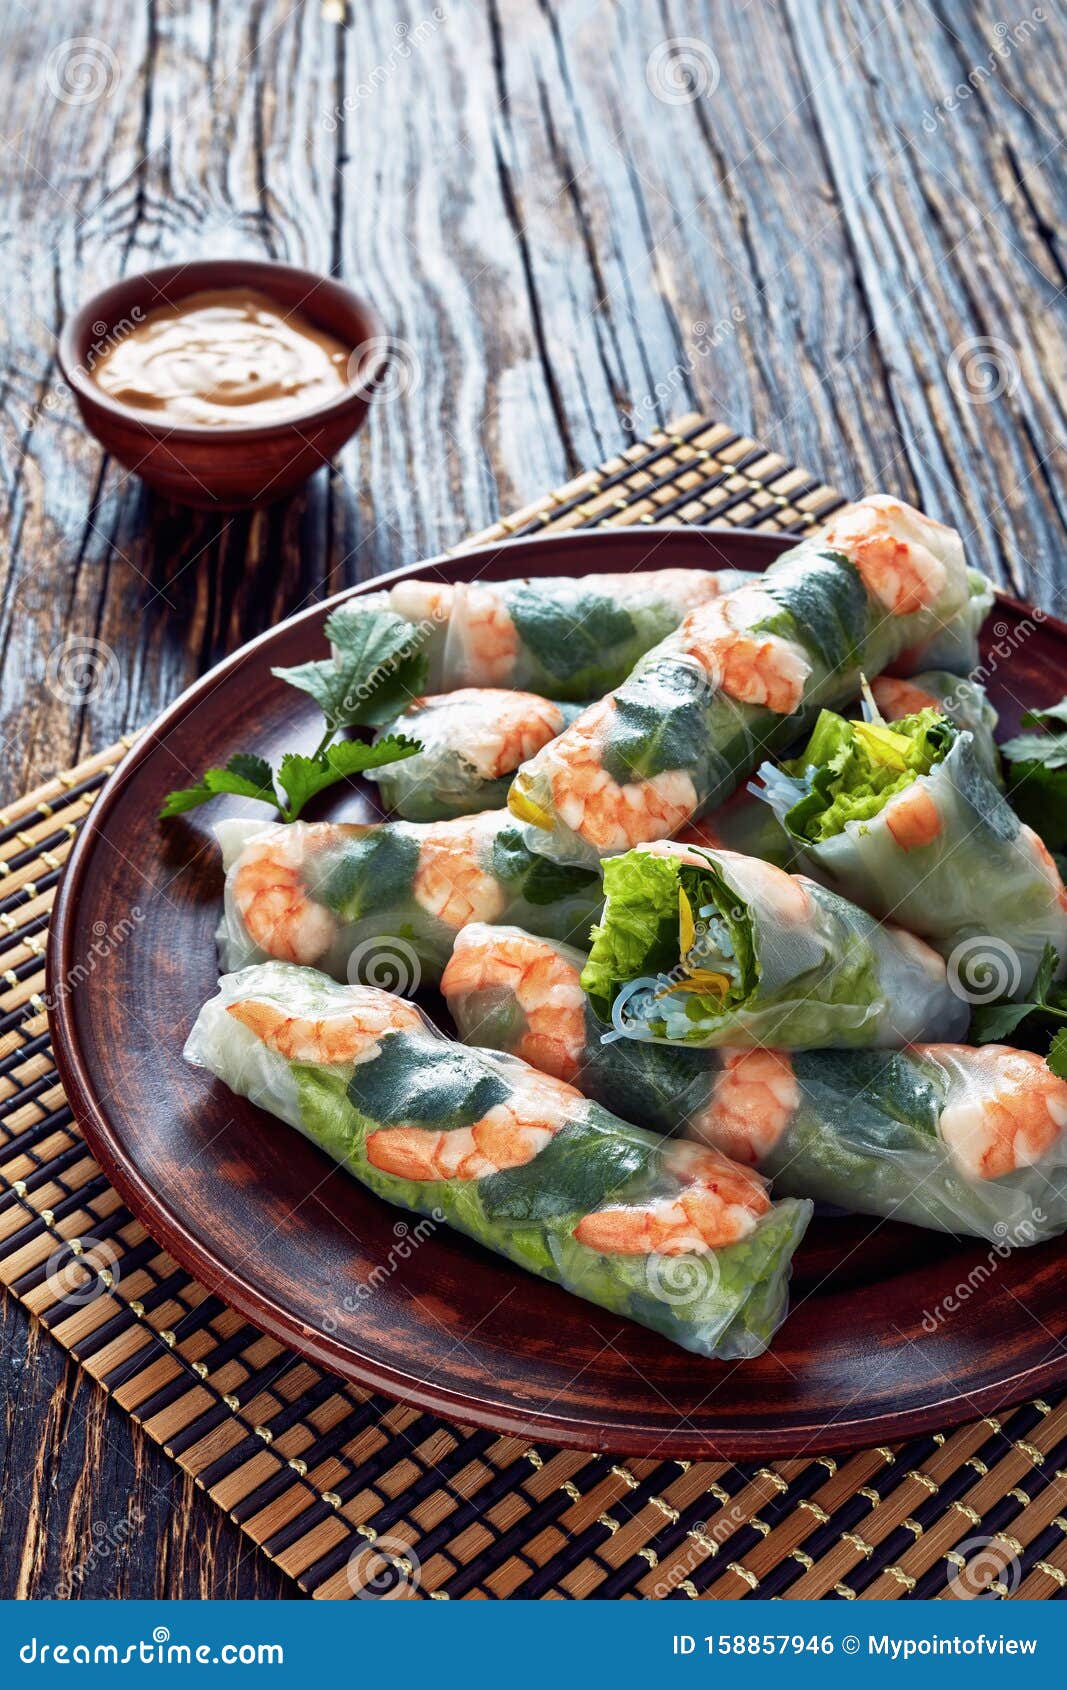 Fresh Raw Asian Spring Rolls Vertical View Stock Photo - Image of ...